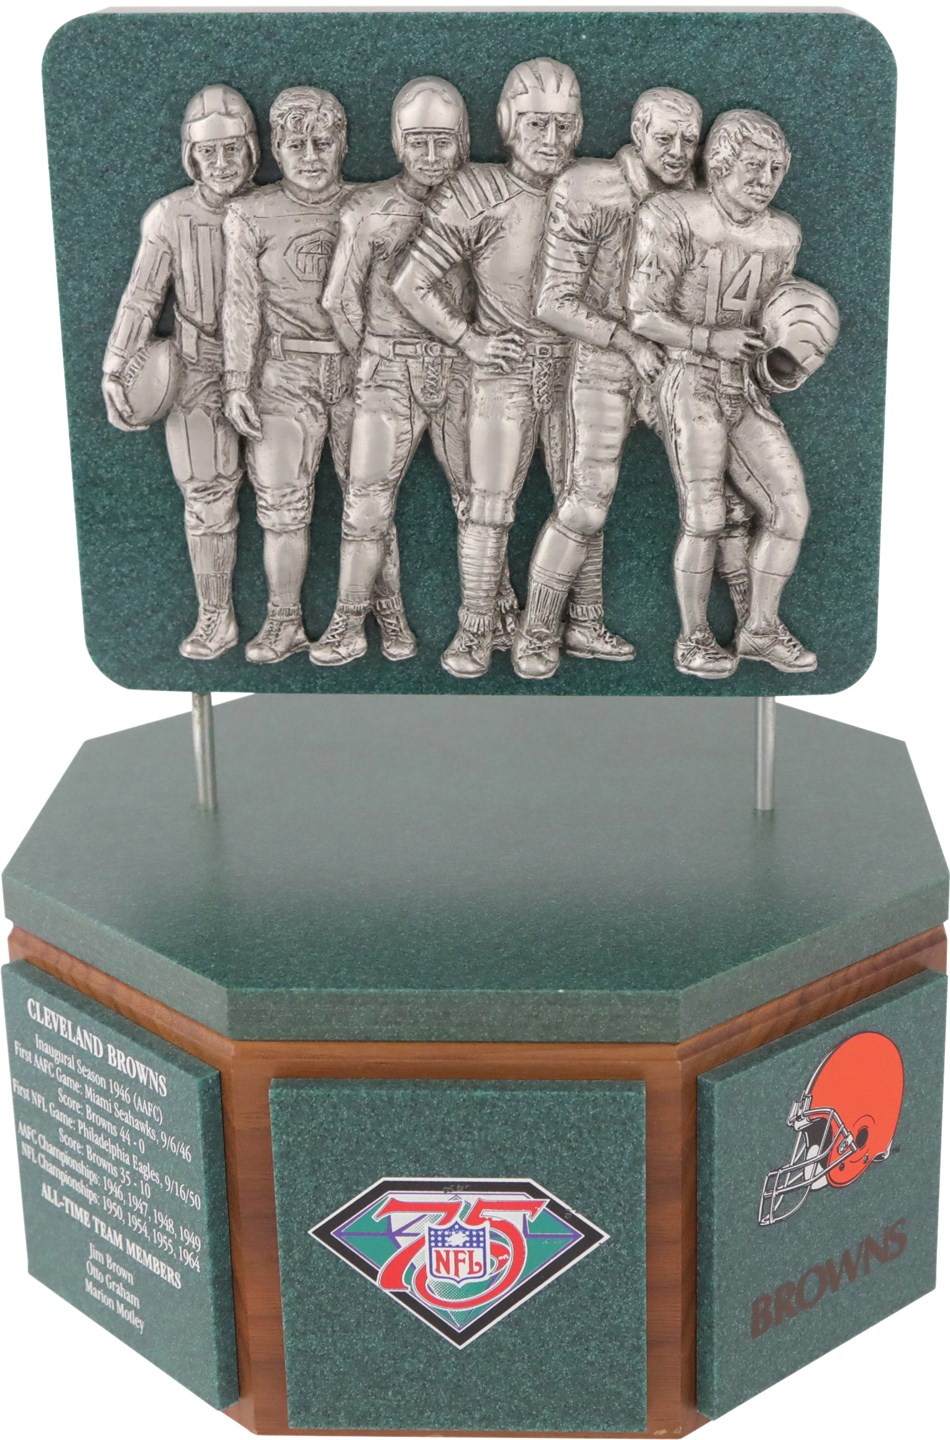 - Cleveland Browns NFL 75th Anniversary Team Award Presented for Jim Brown, Otto Graham, and Marion Motley